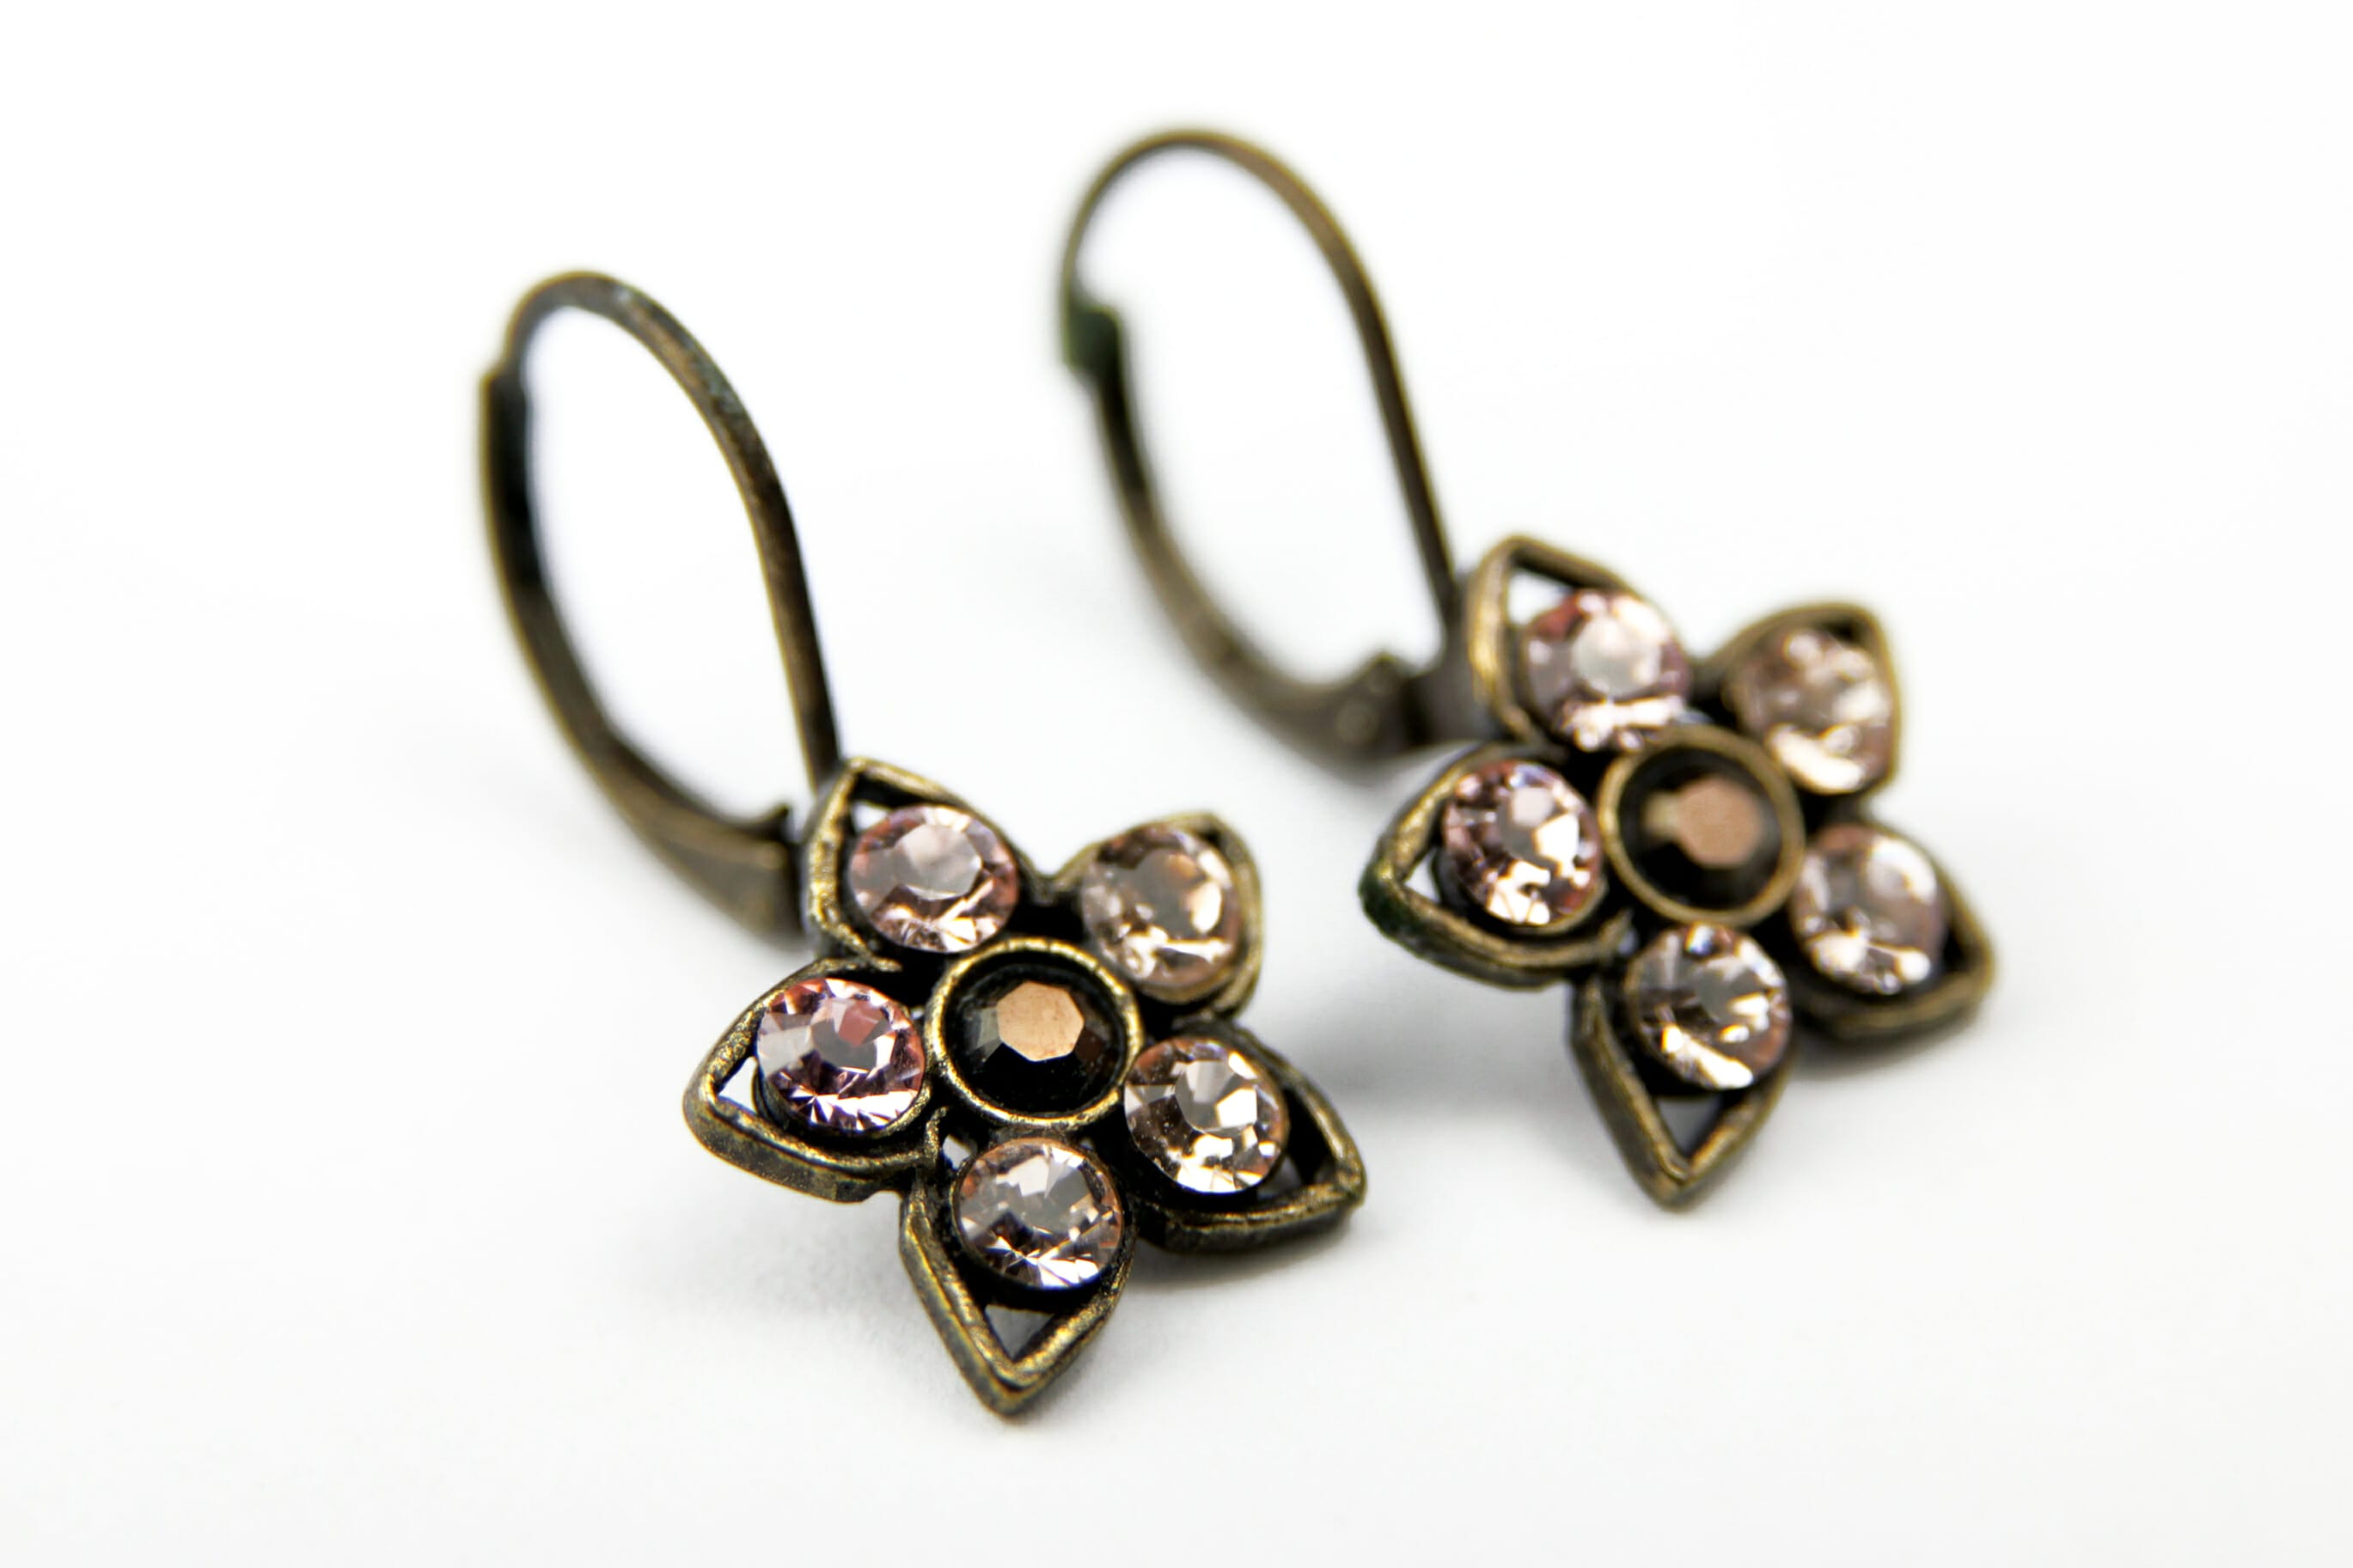 Iconic Illumination - Silver Earrings - Chic Jewelry Boutique